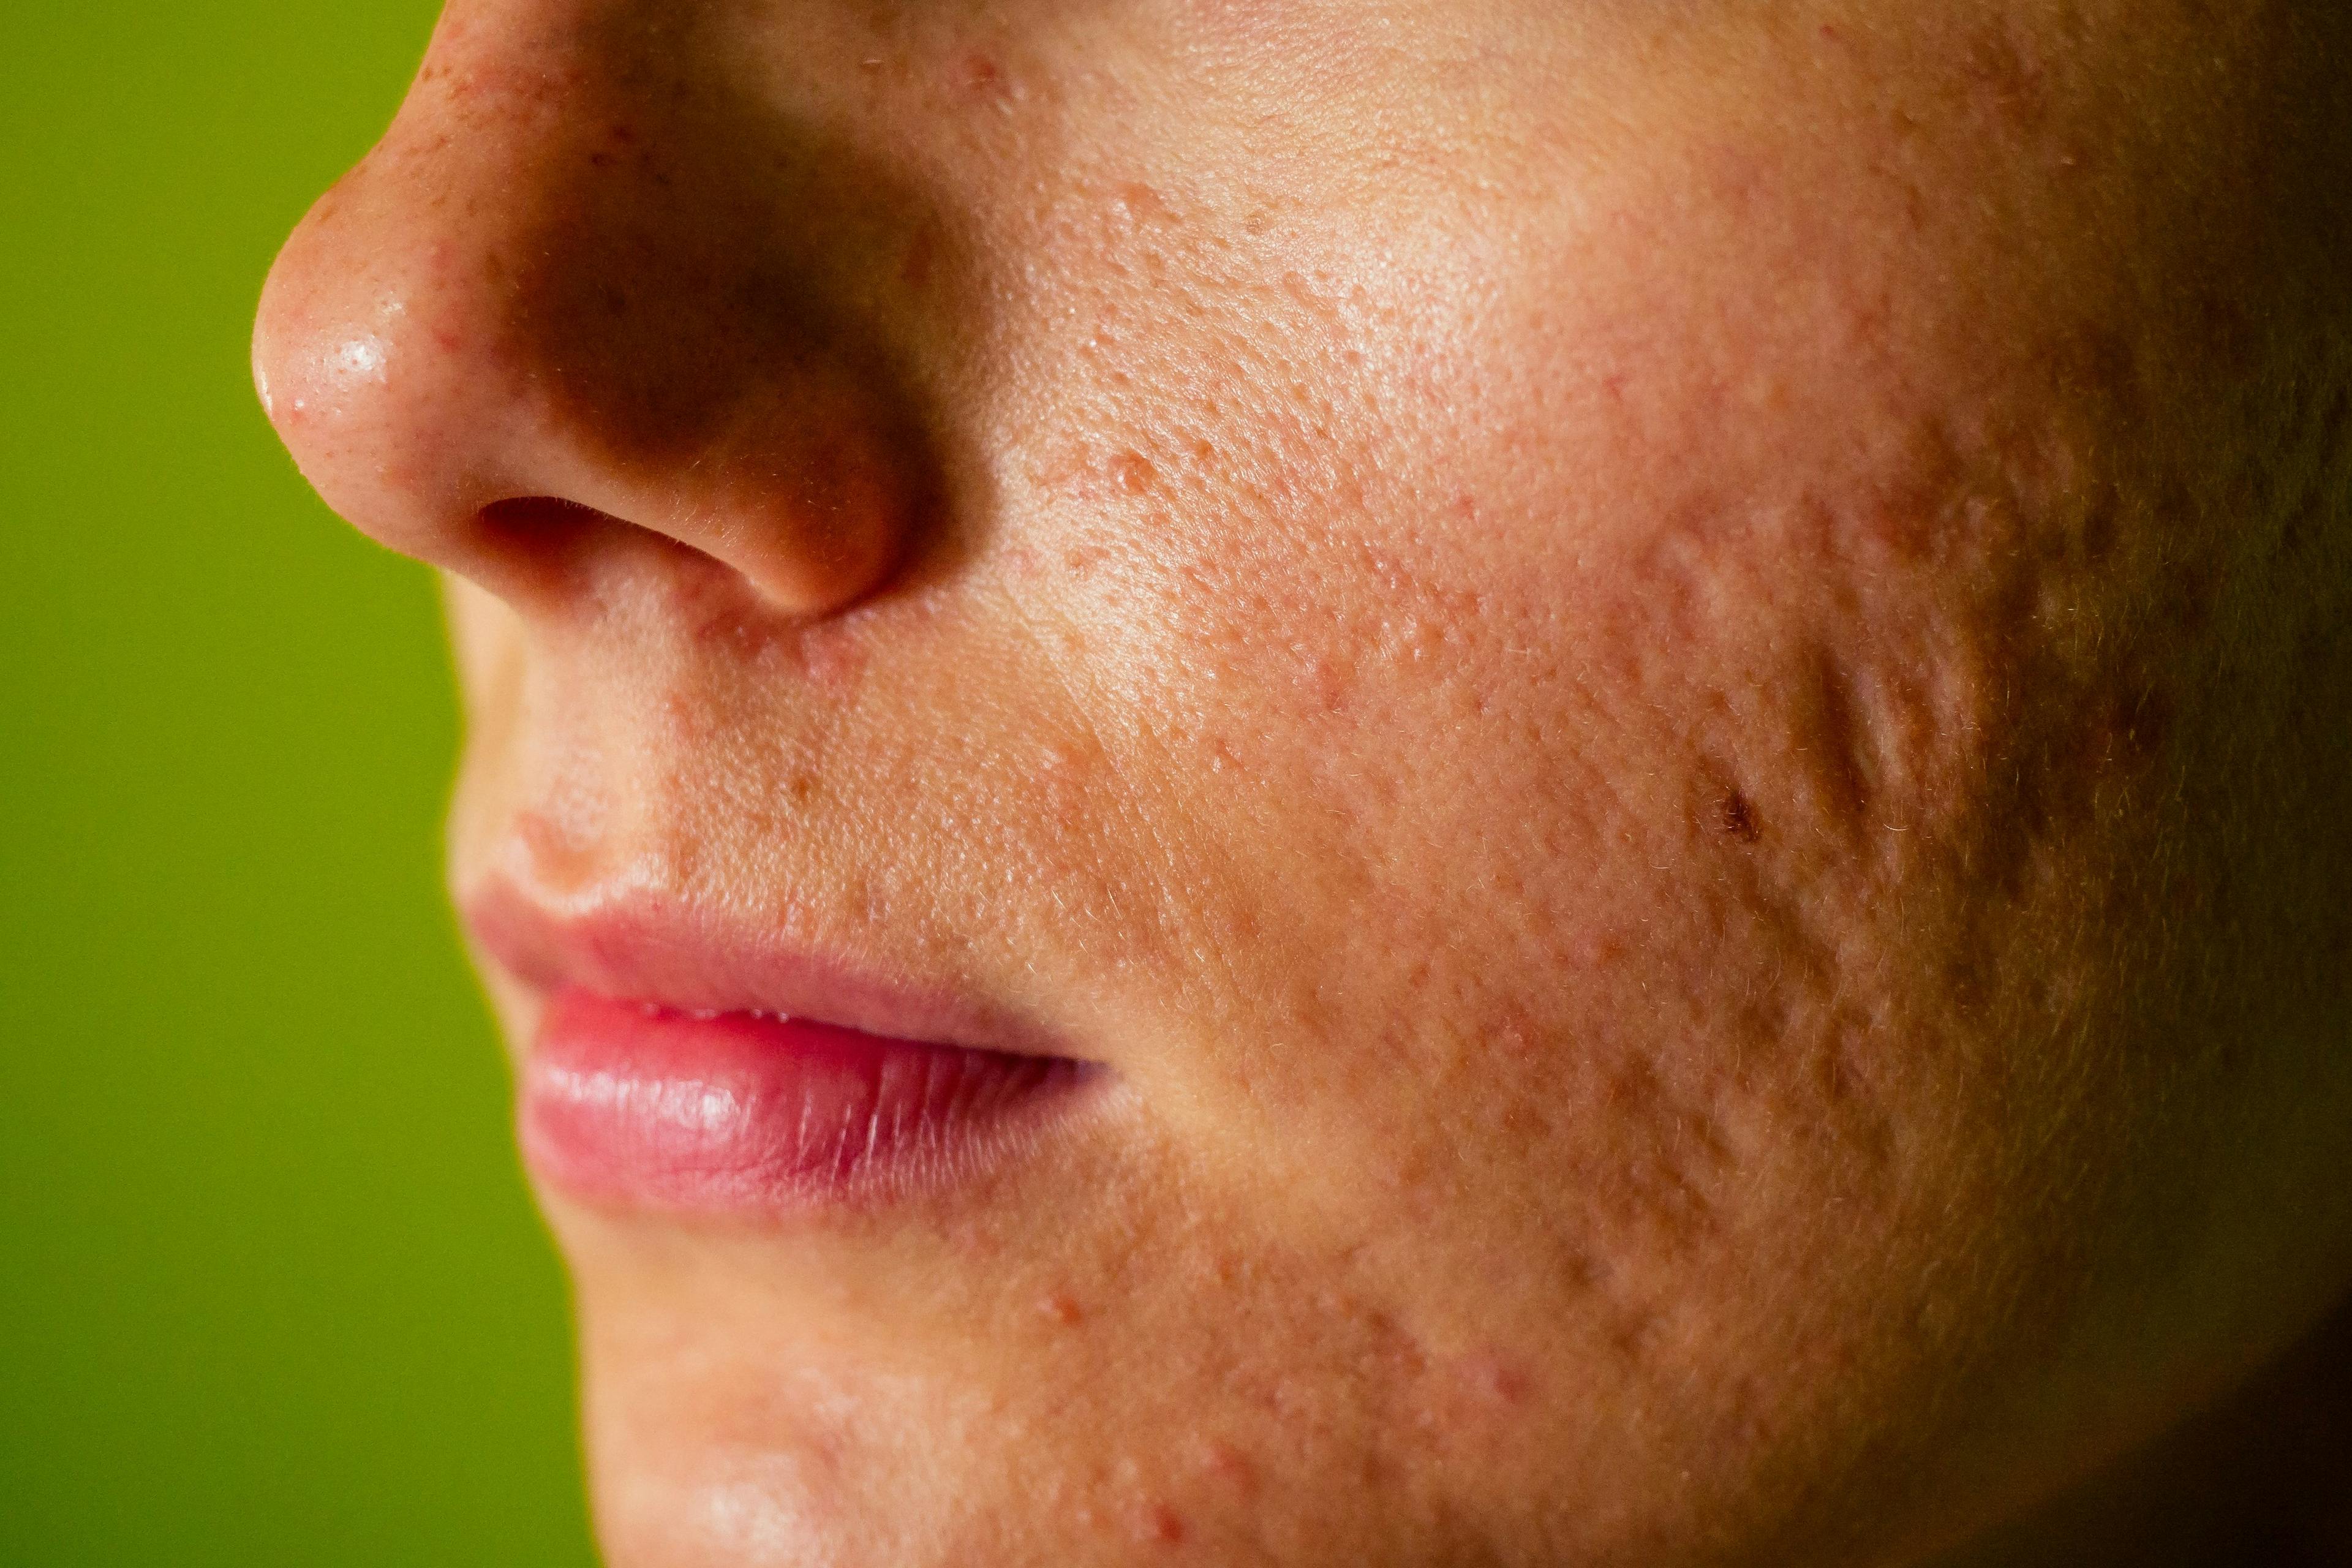 woman with atrophic acne scars